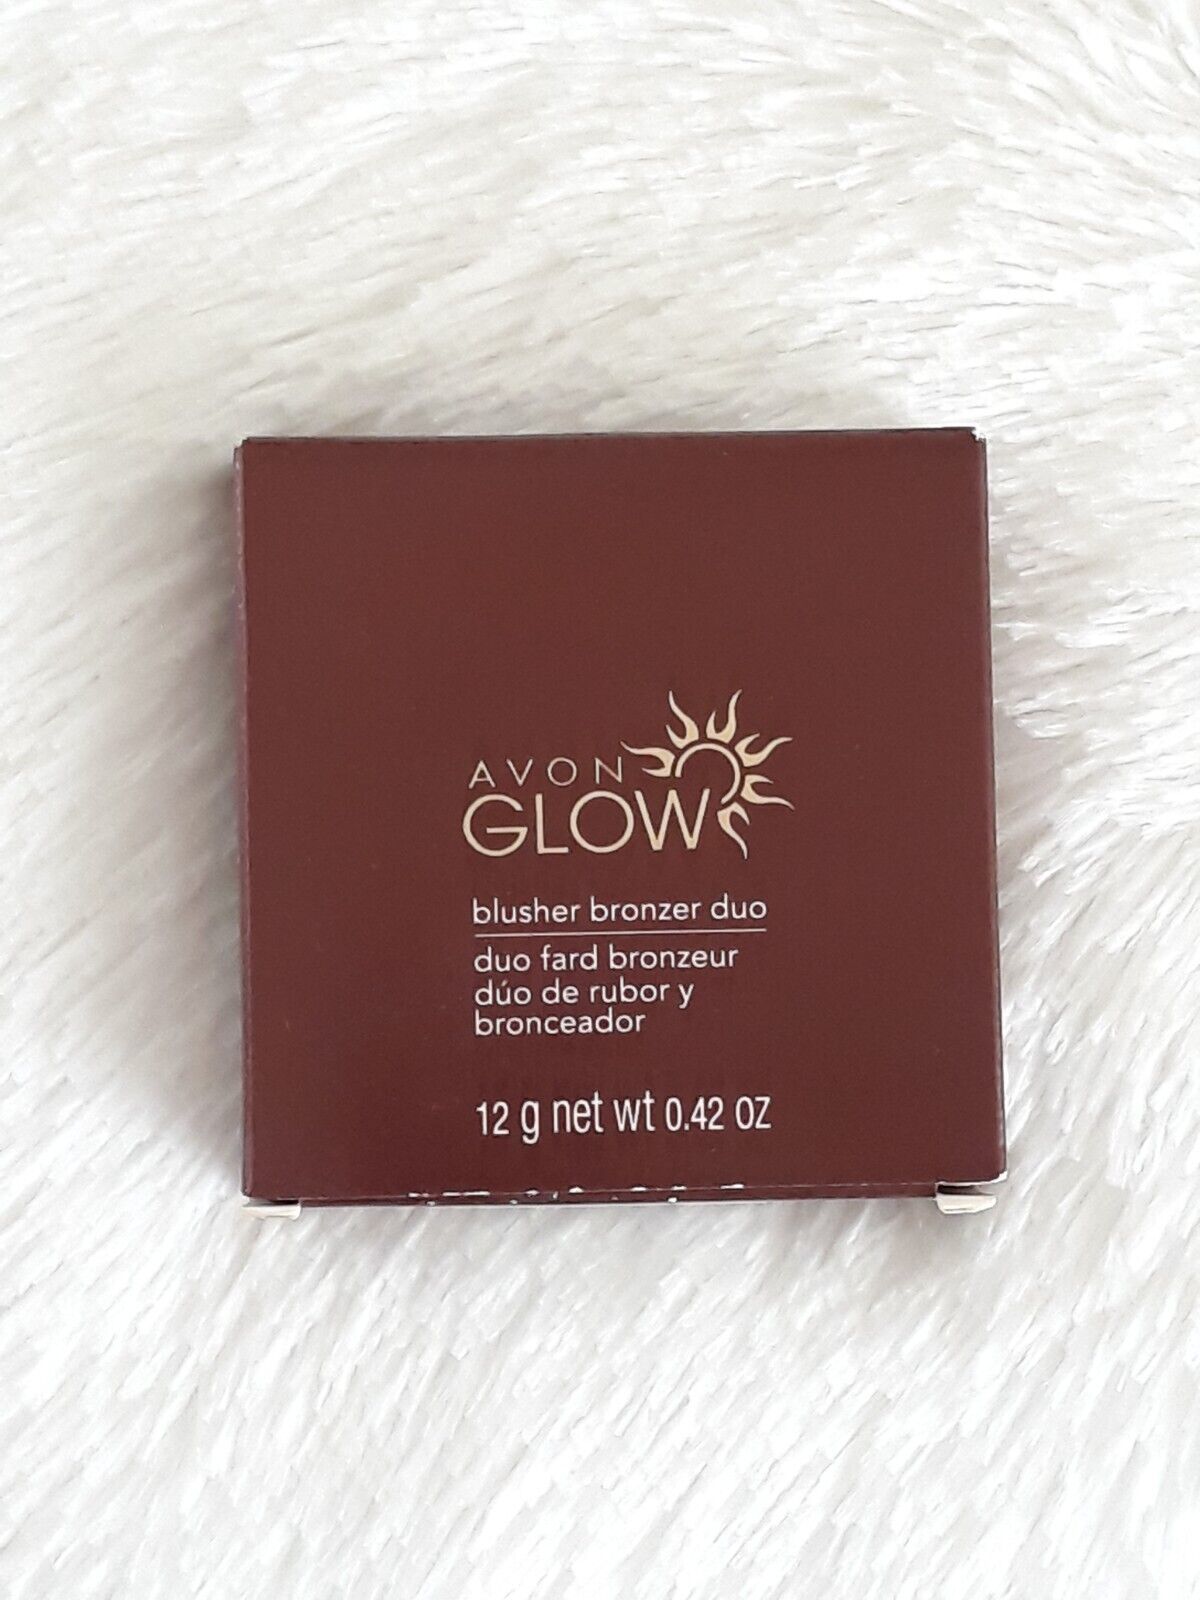 Primary image for AVON GLOW BLUSHER BRONZER DUO ~ "BERRY GLOW" ~ 0.42 oz ~ DISCONTINUED /RETIRED